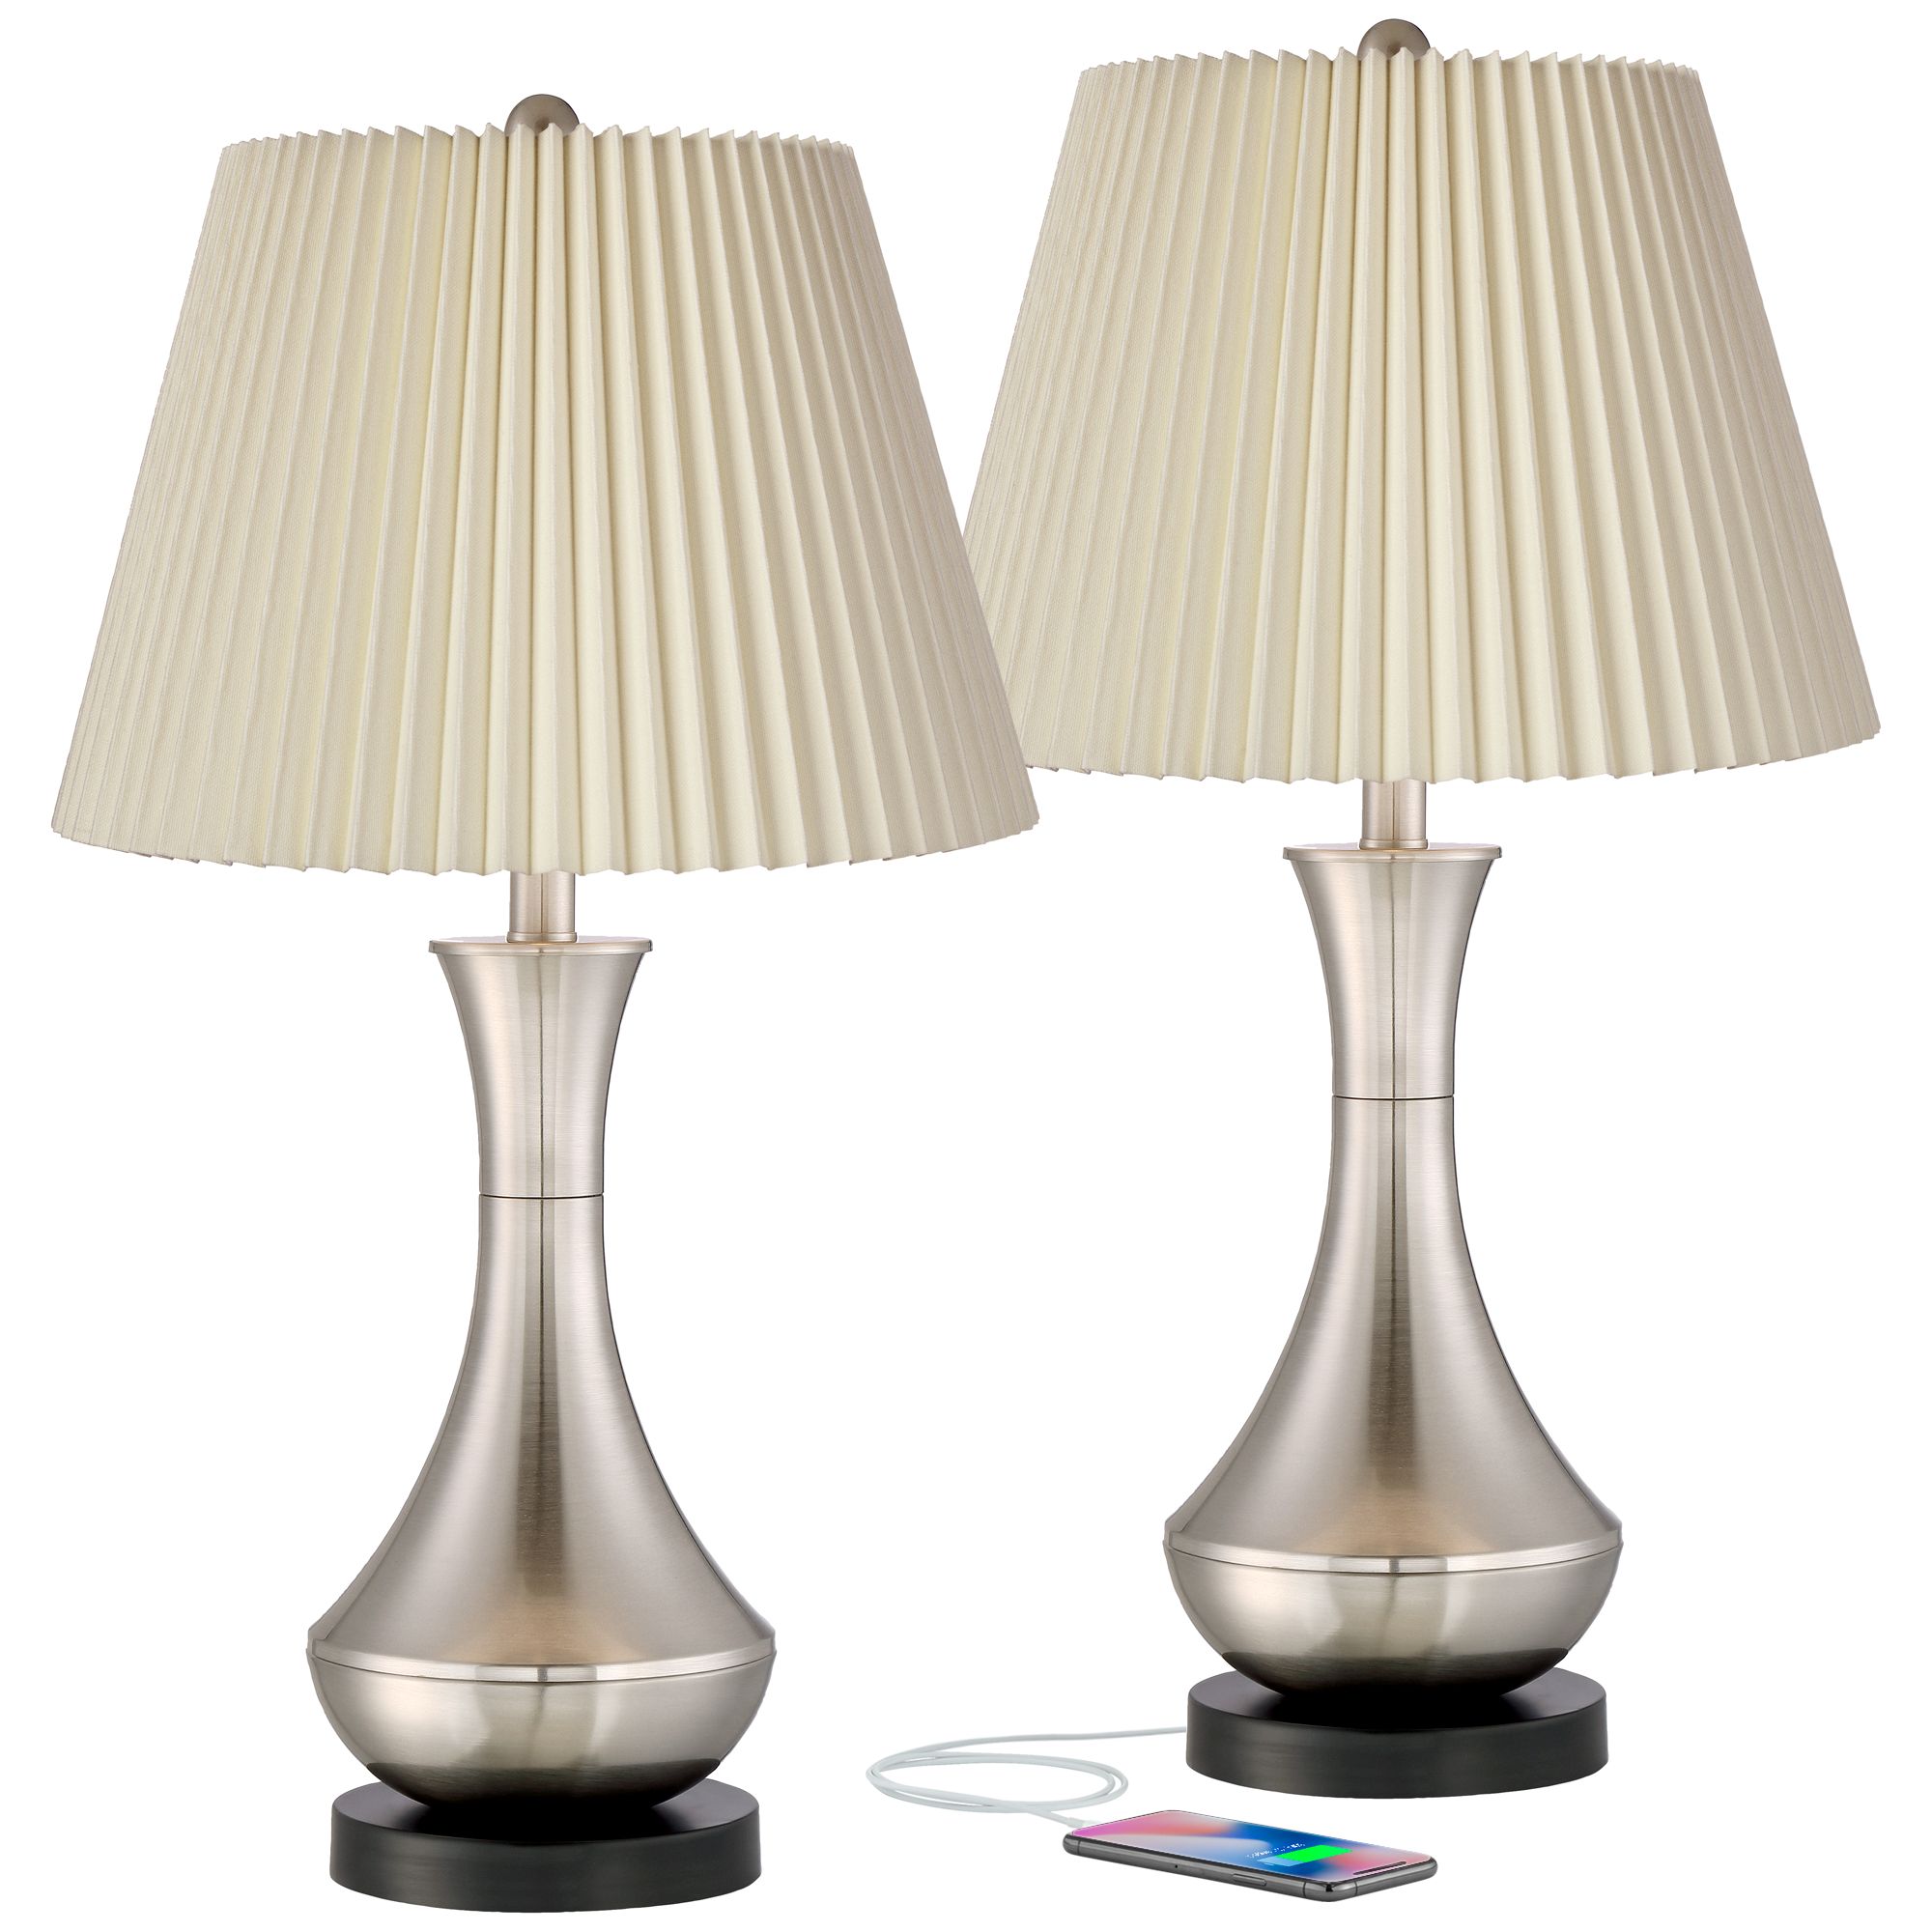 Simon Brushed Nickel USB Table Lamps with Linen Pleated Shades Set of 2